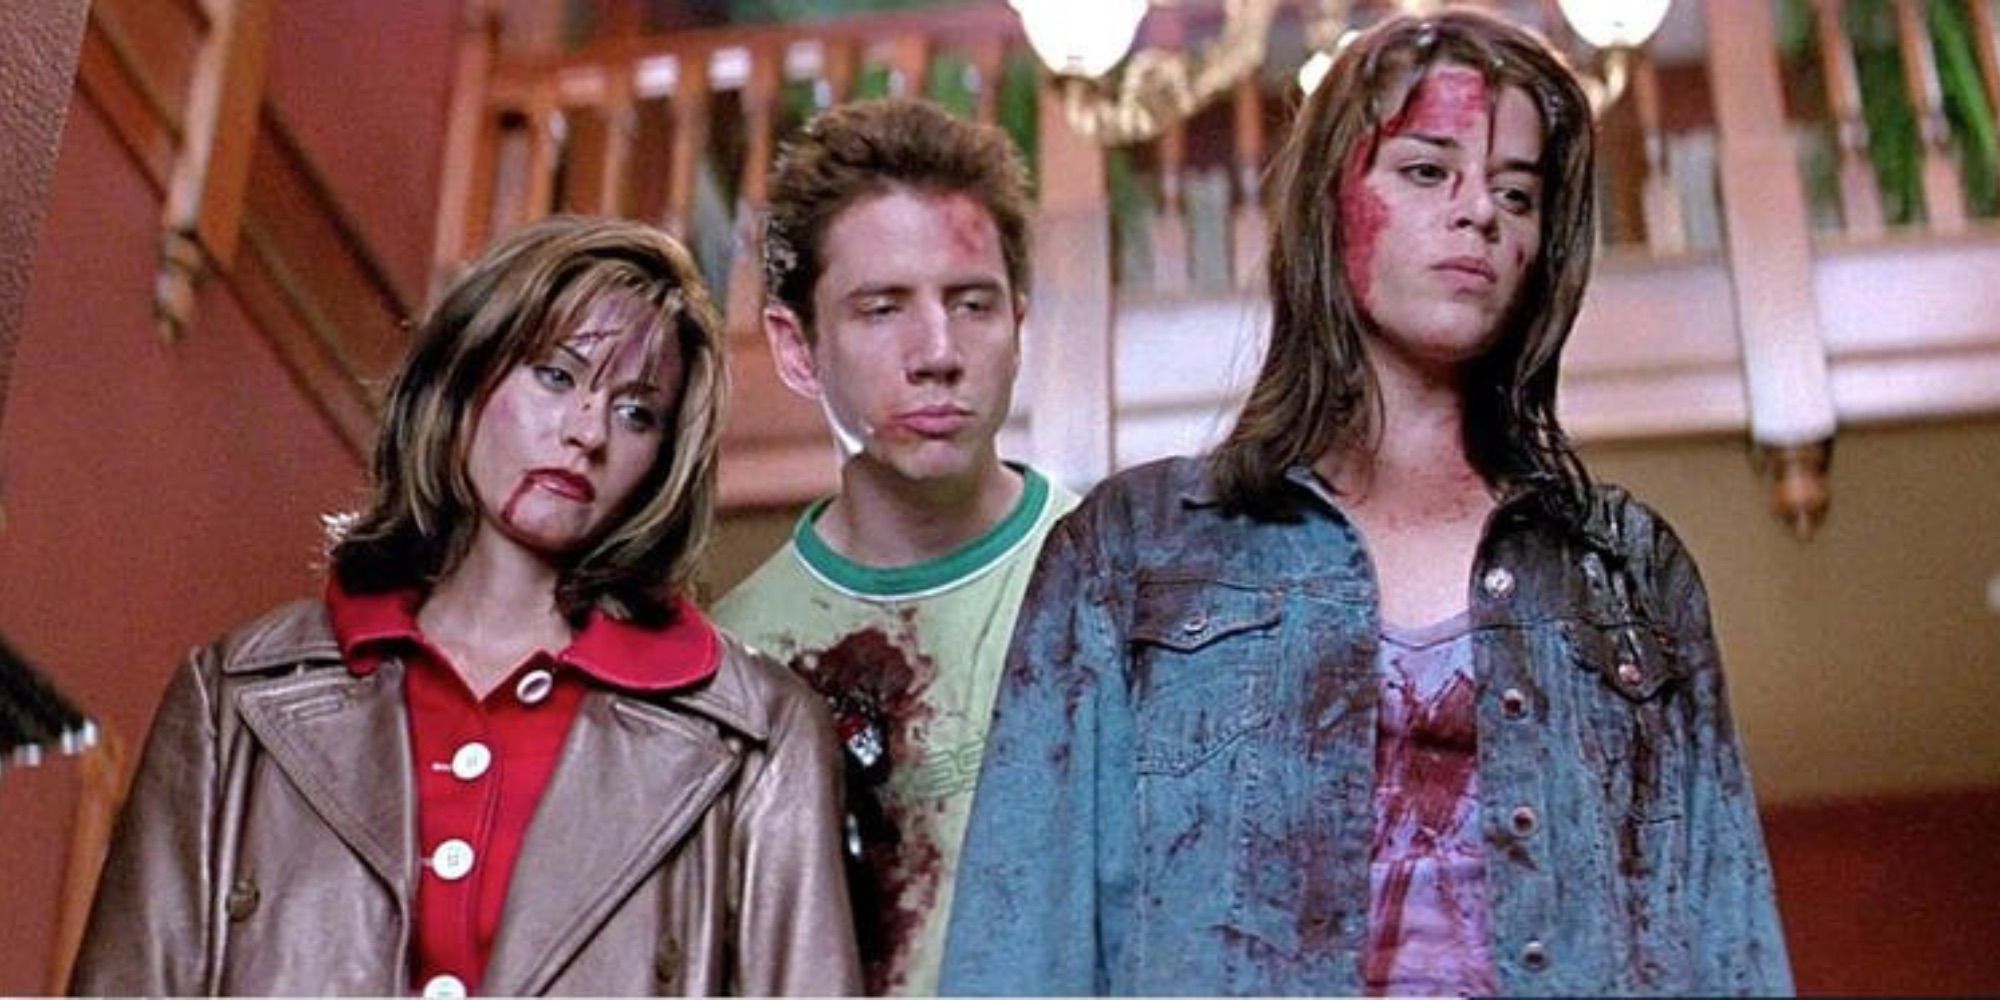 Gale, Randy, and Sidney covered in blood looking down at something off-camera in Scream.